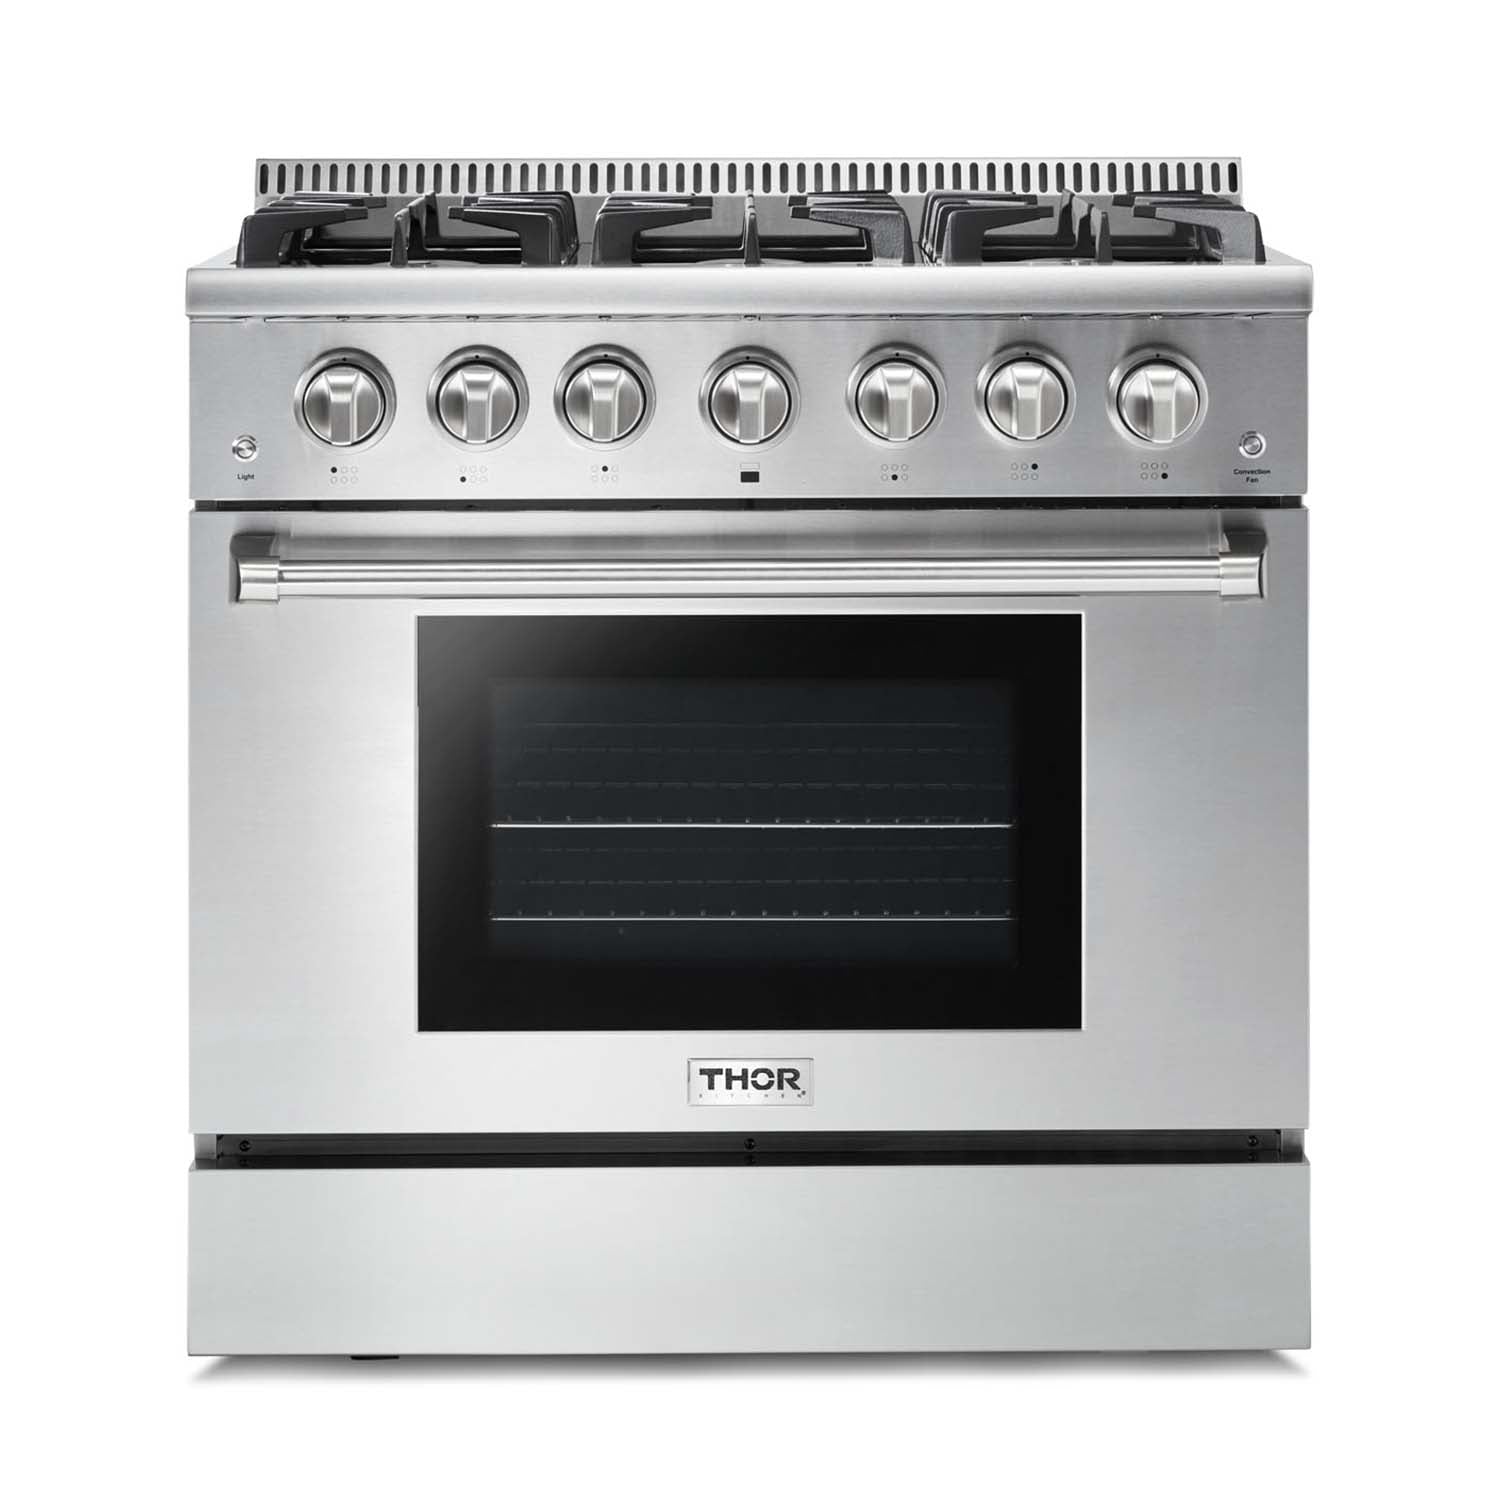 Thor Kitchen 36 in. Professional Natural Gas Range in Stainless Steel HRG3618U Ranges Luxury Appliances Direct